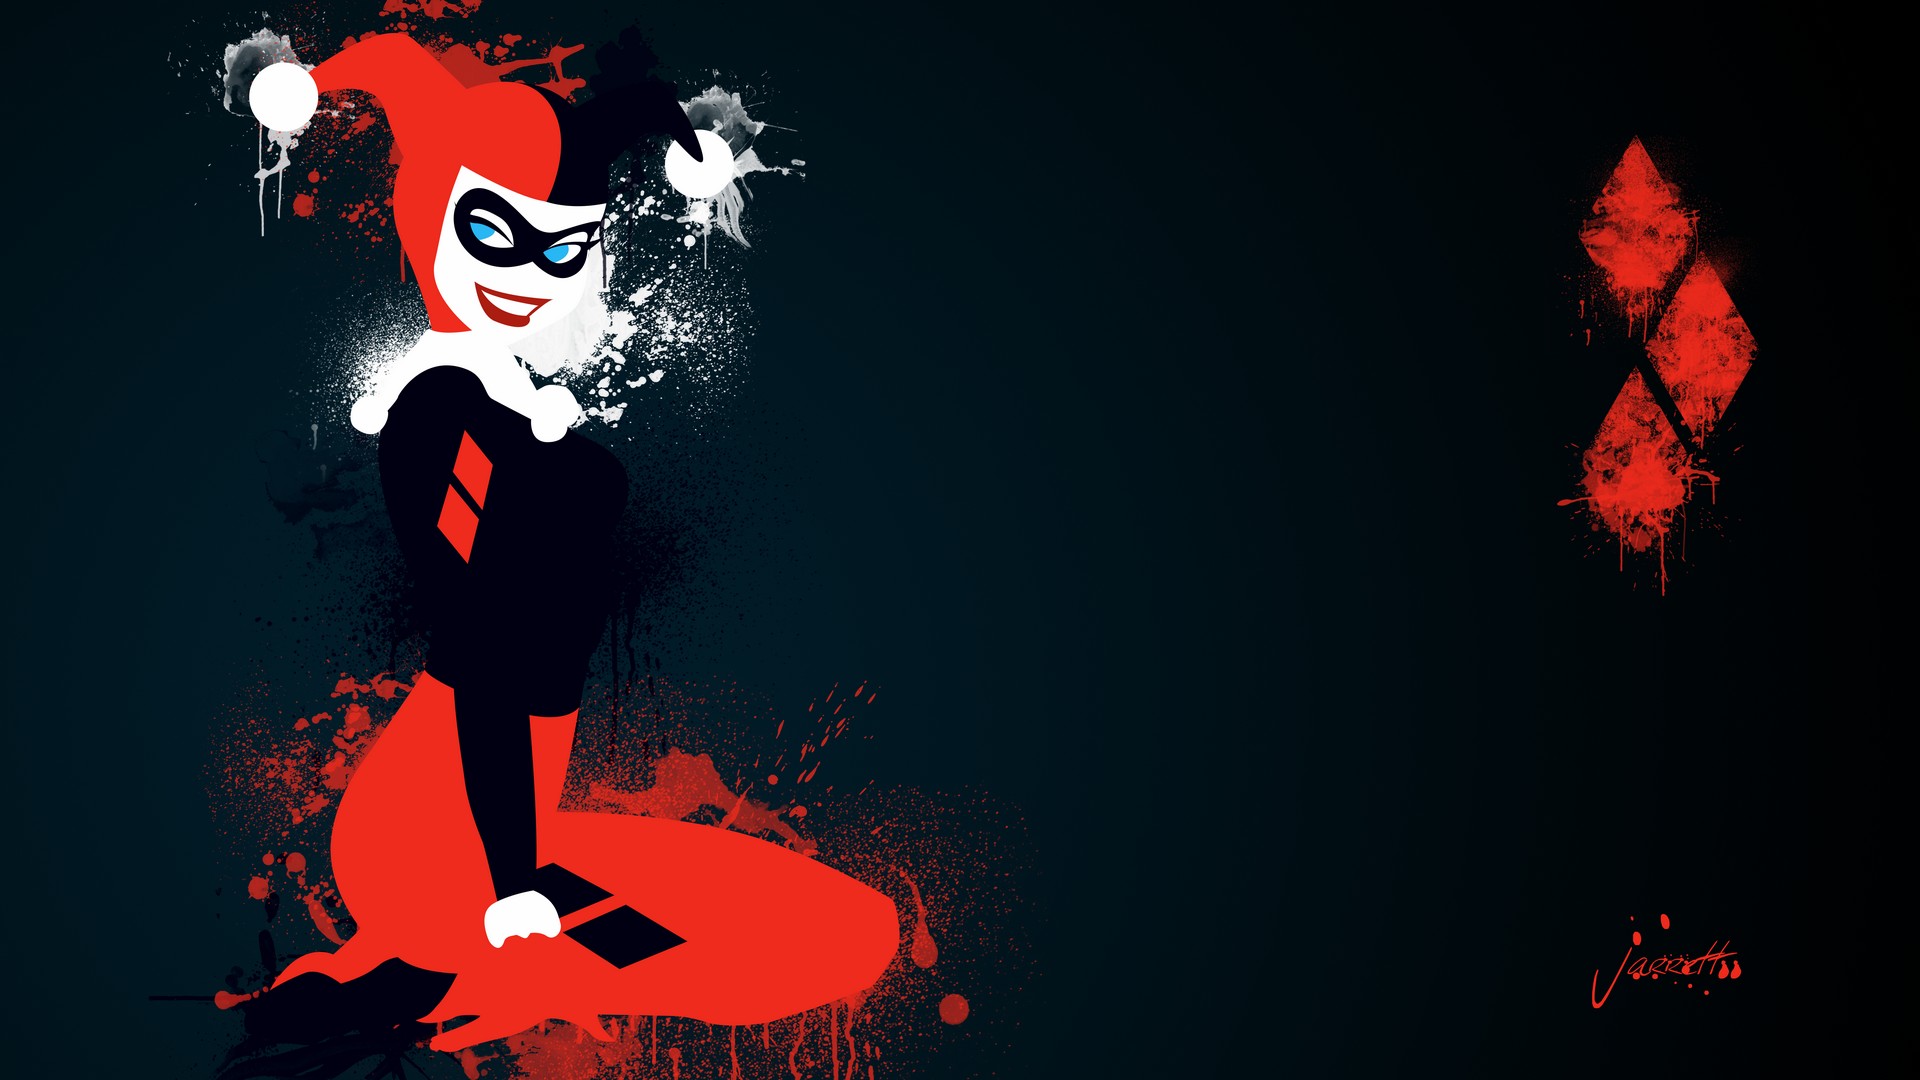 Wallpaper Harley Quinn The Movie Desktop with image resolution 1920x1080 pixel. You can use this wallpaper as background for your desktop Computer Screensavers, Android or iPhone smartphones